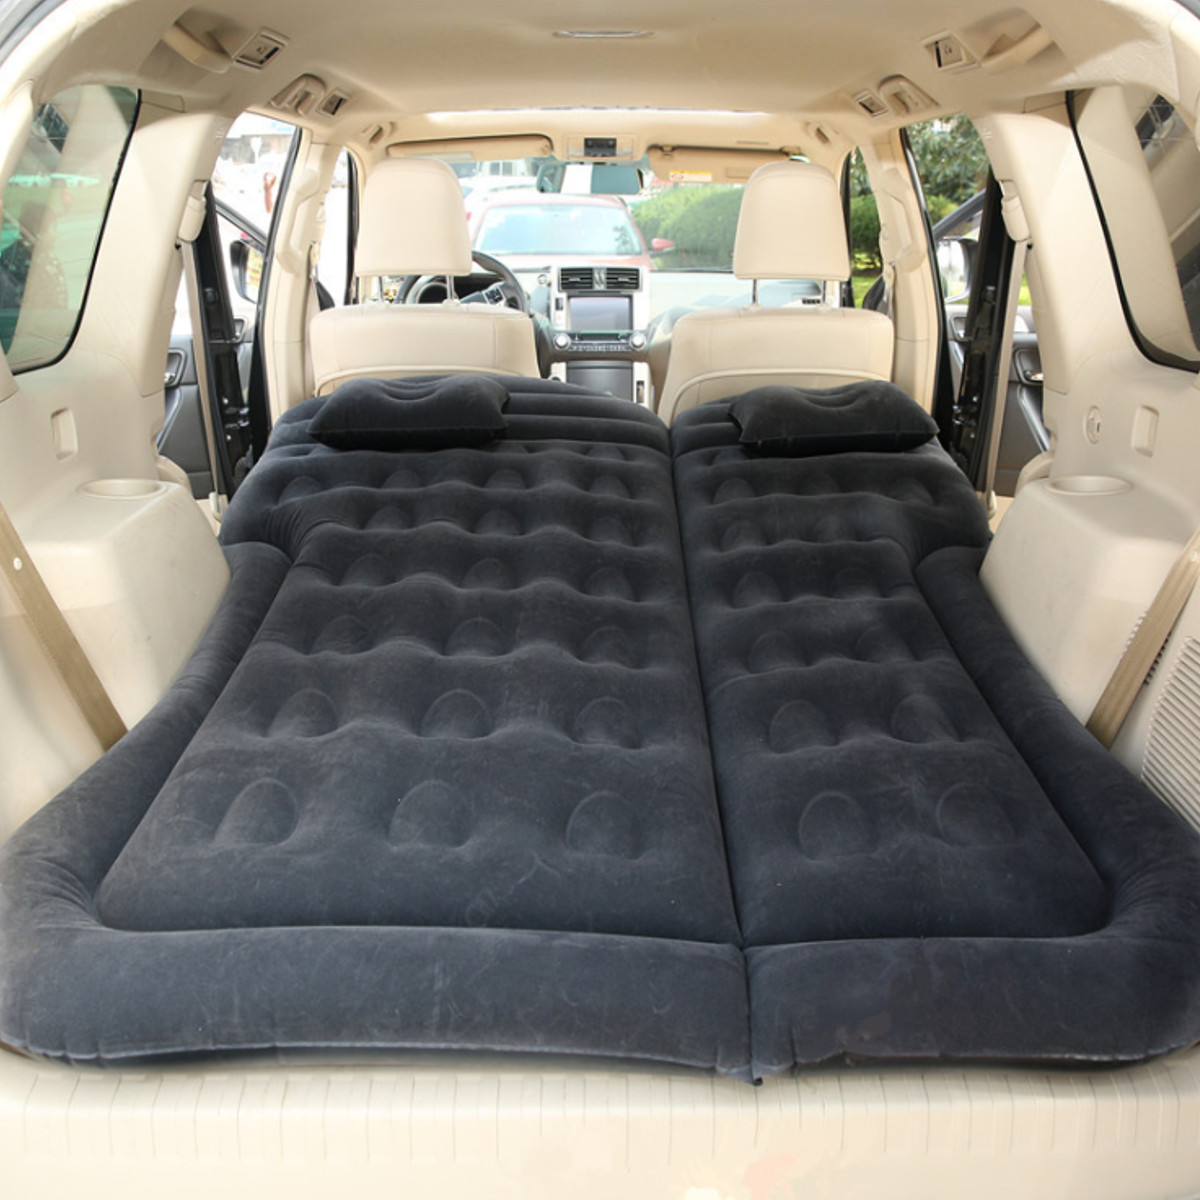 180x130cm-Multifunctional-Inflatable-Car-Air-Mattress-Durable-Back-Seat-Cover-Travel-Bed-Moisture-pr-1888970-5